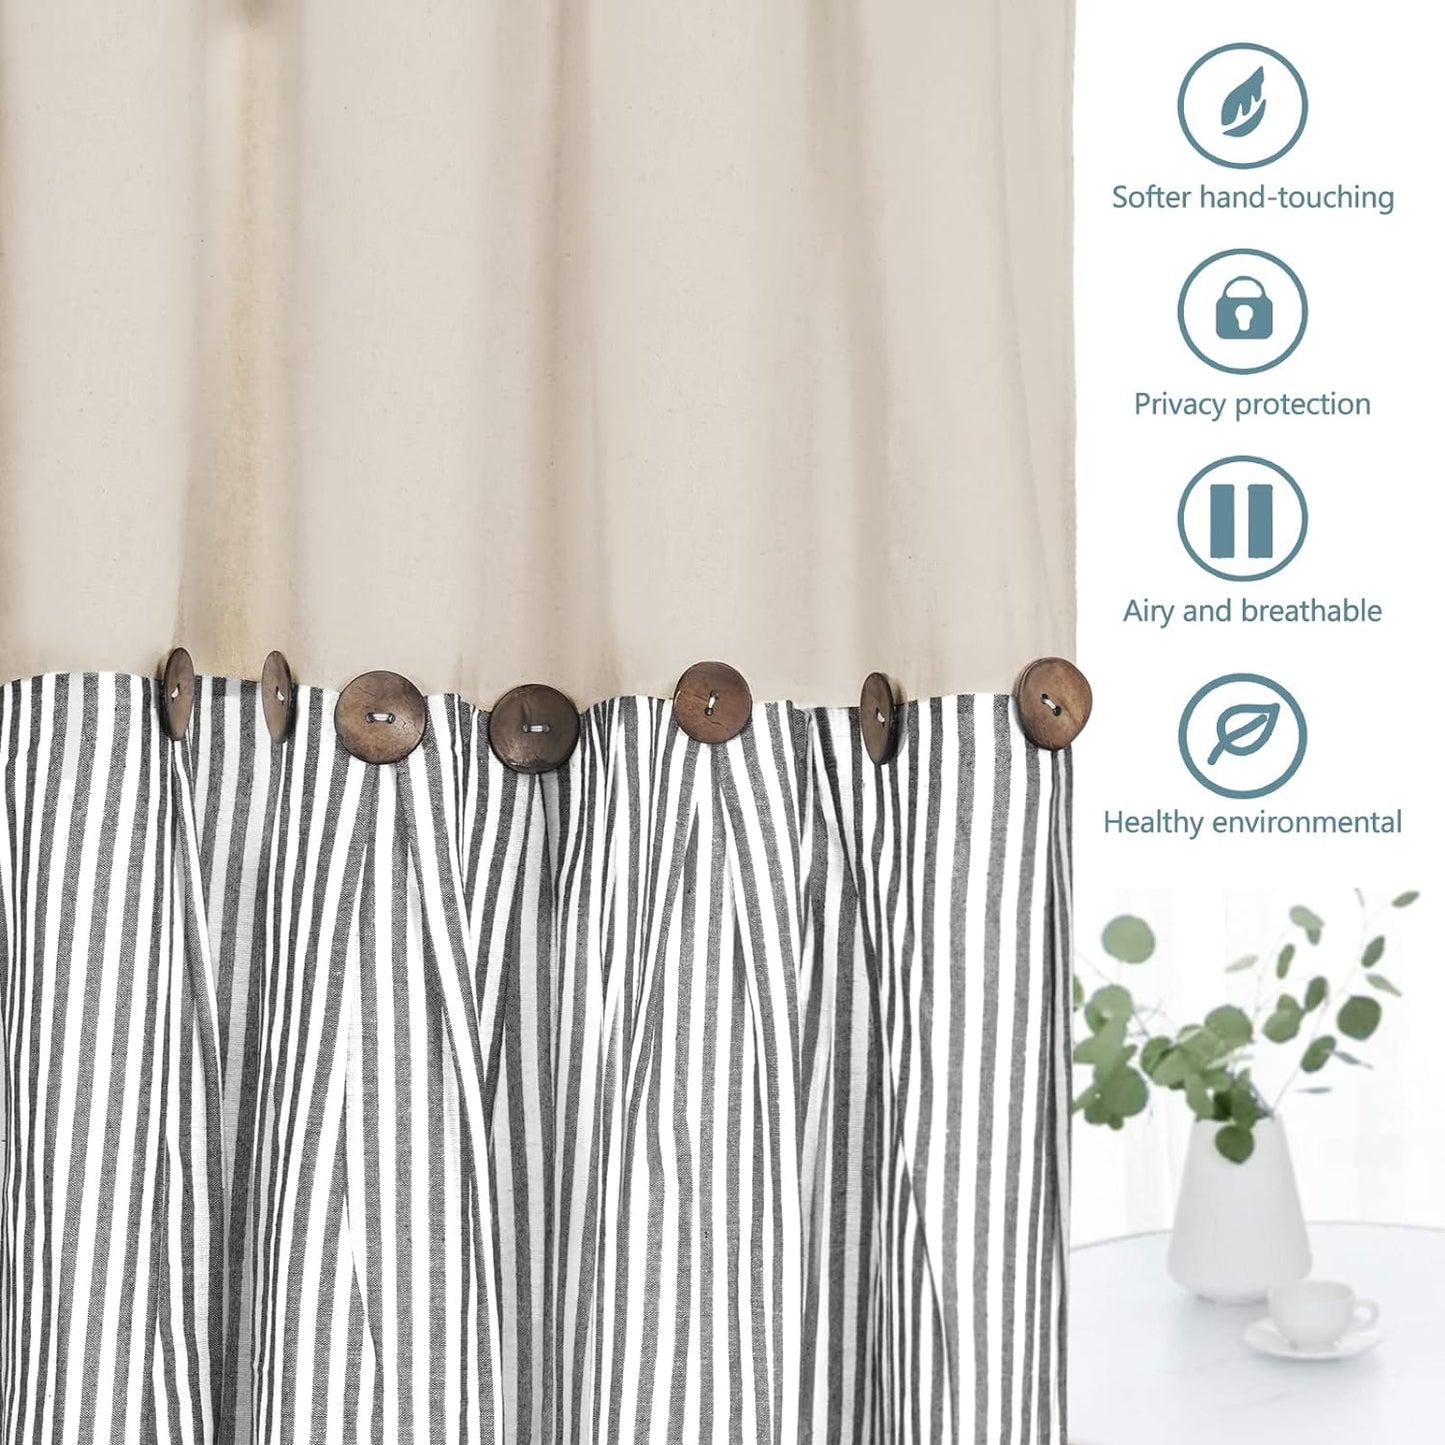 Cotton Linen Farmhouse Curtains Boho Rustic Button Curtains Natural and Dark Grey Stripe Color Block Curtain Rod Pocket & Back Tab Window Drapes for Bedroom Living Room(52 X 84 Inch, 2 Panels)  BLEUM CADE   